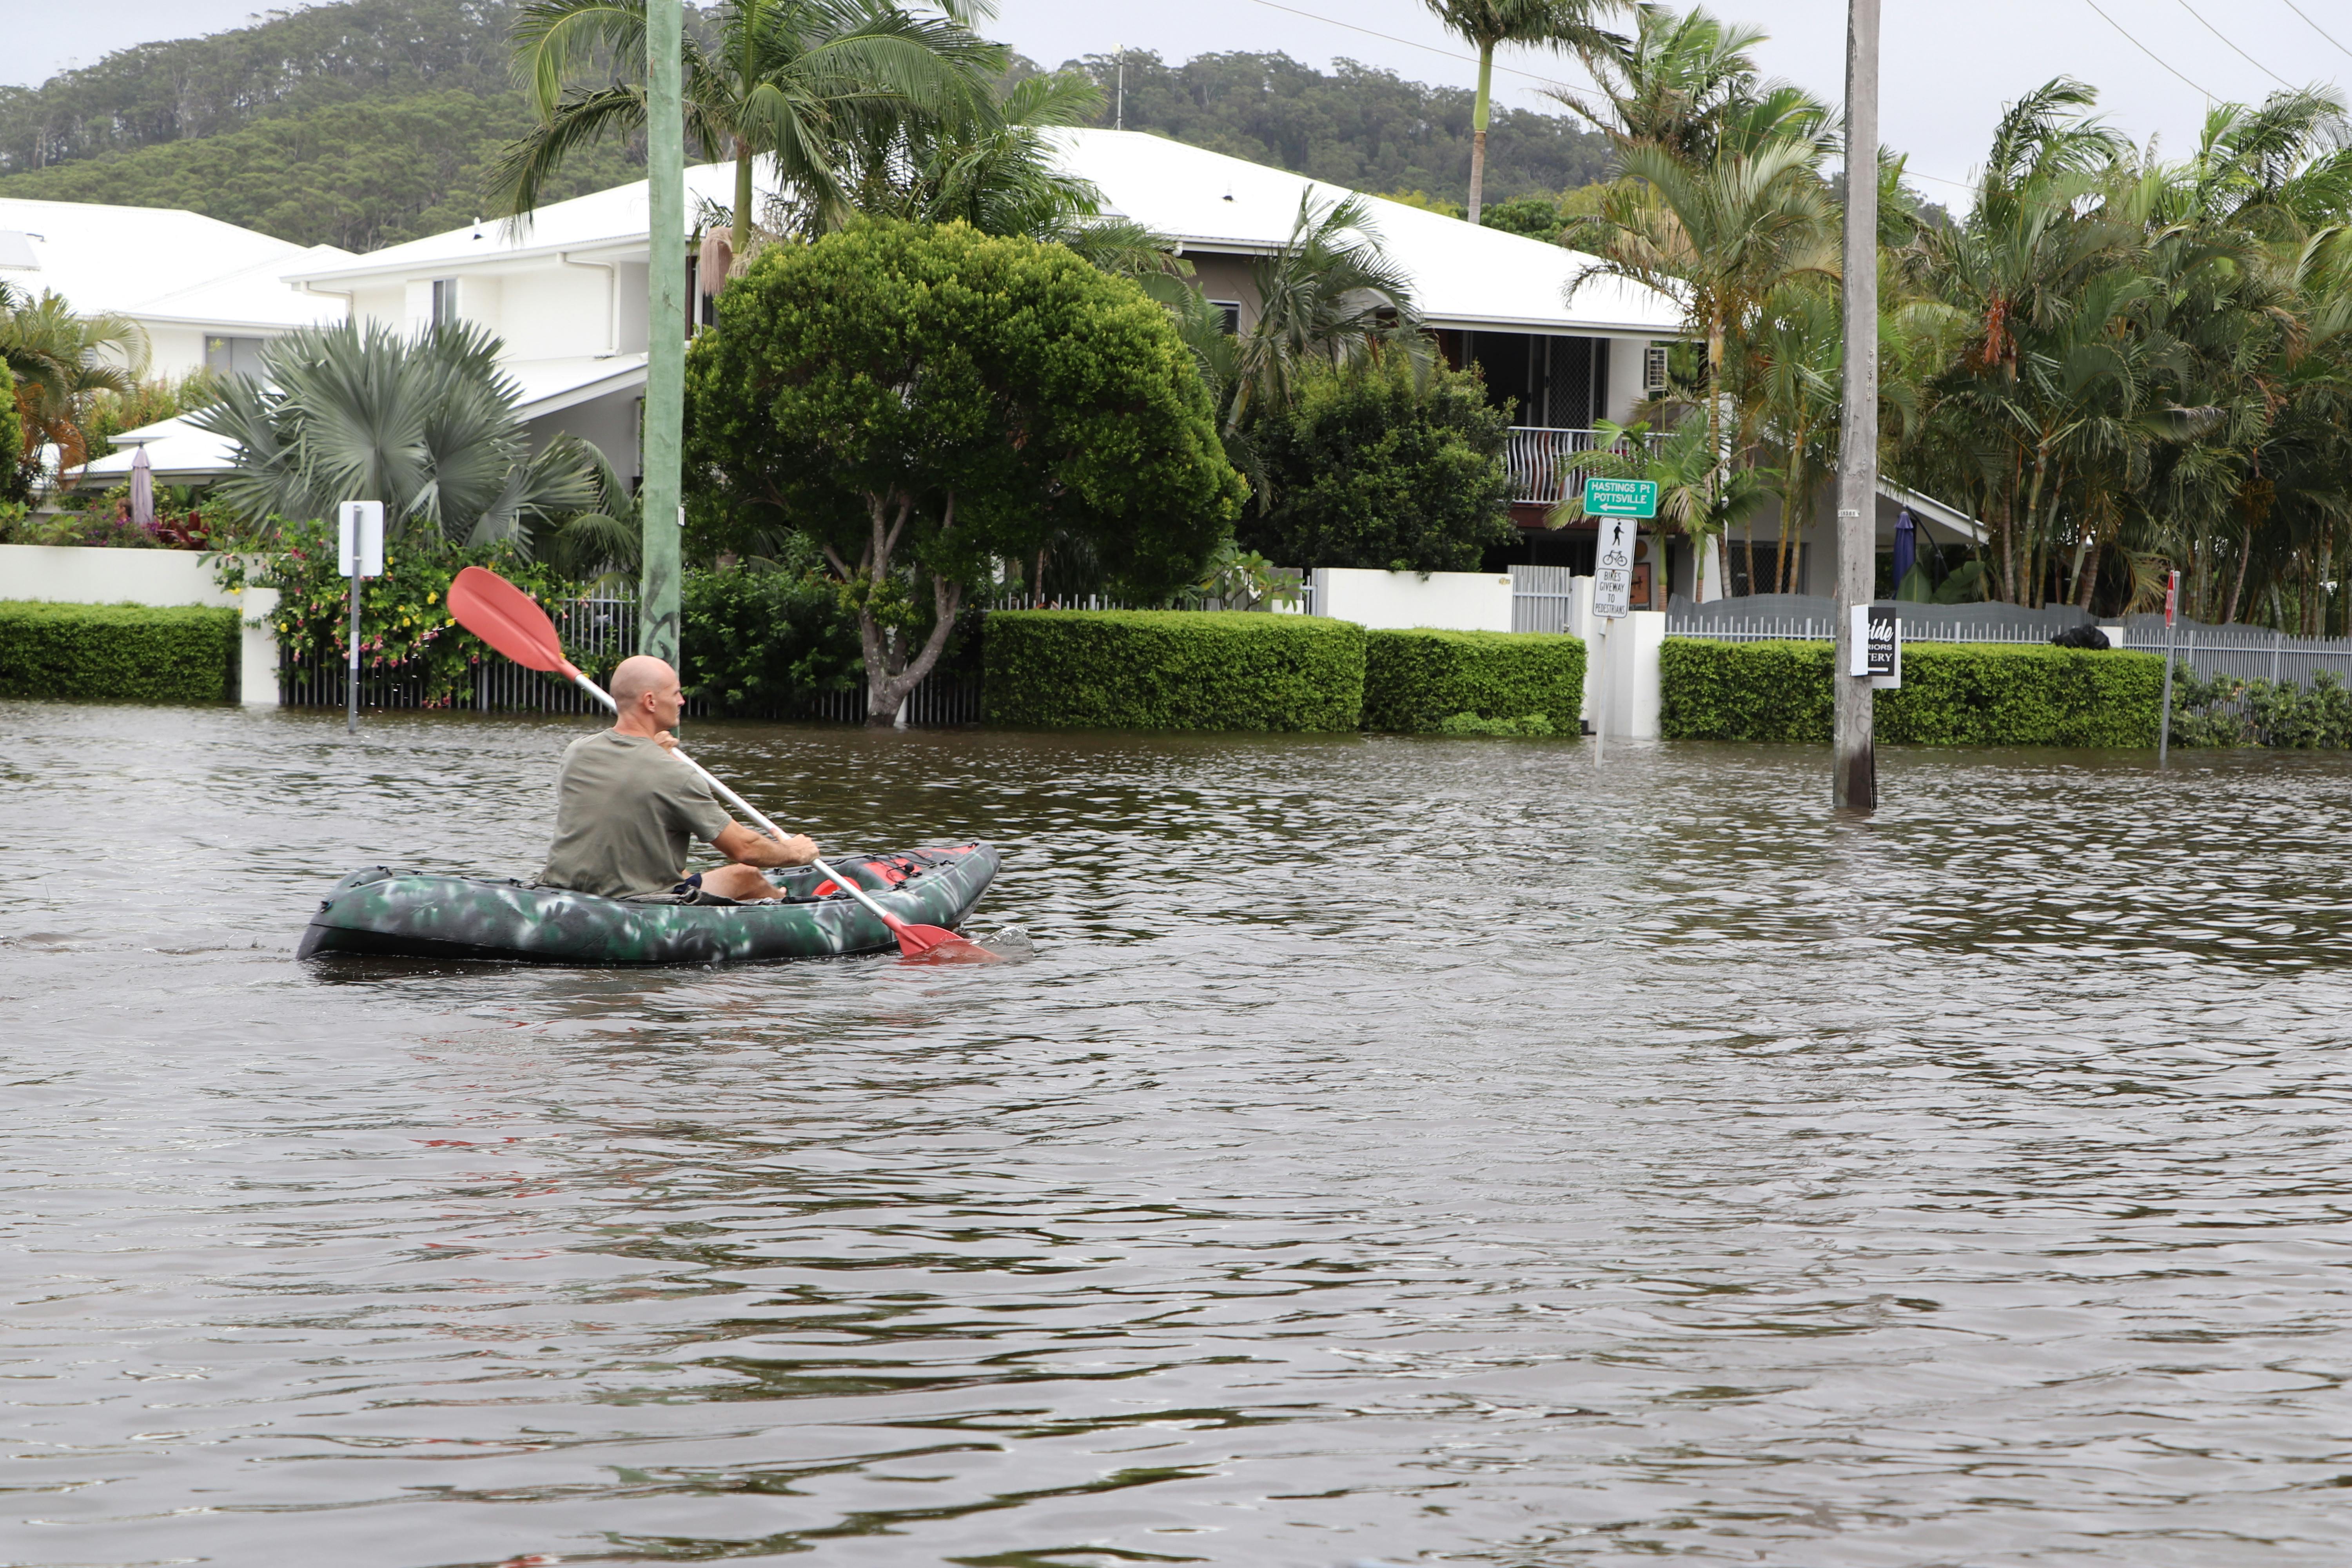 Flooding in Cabarita - Rosewood Ave - 1 March 2022